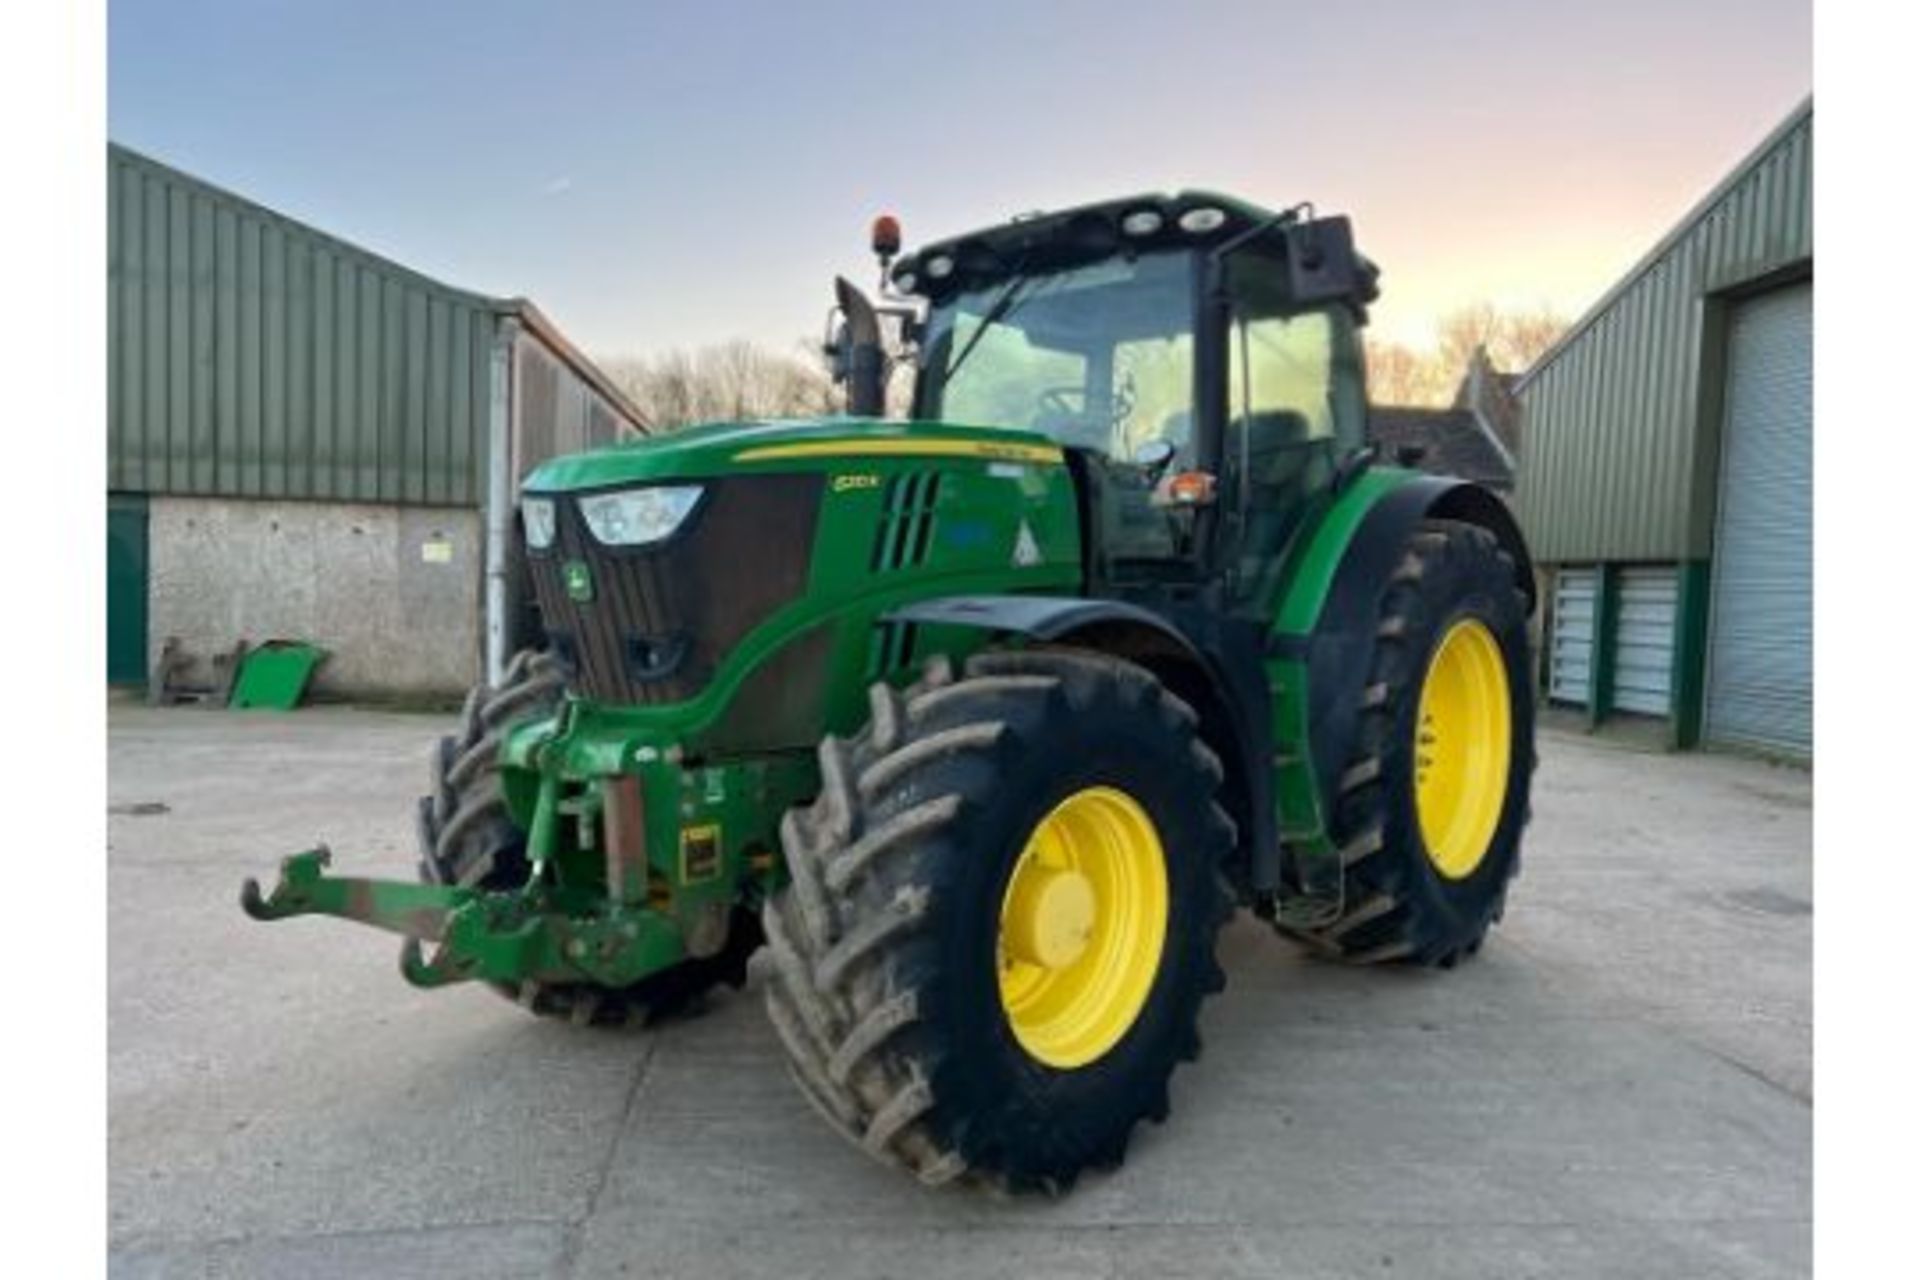 2013 John Deere 6210R 4wd Tractor, approx. 8136 Hours, Reg No. - Image 4 of 9